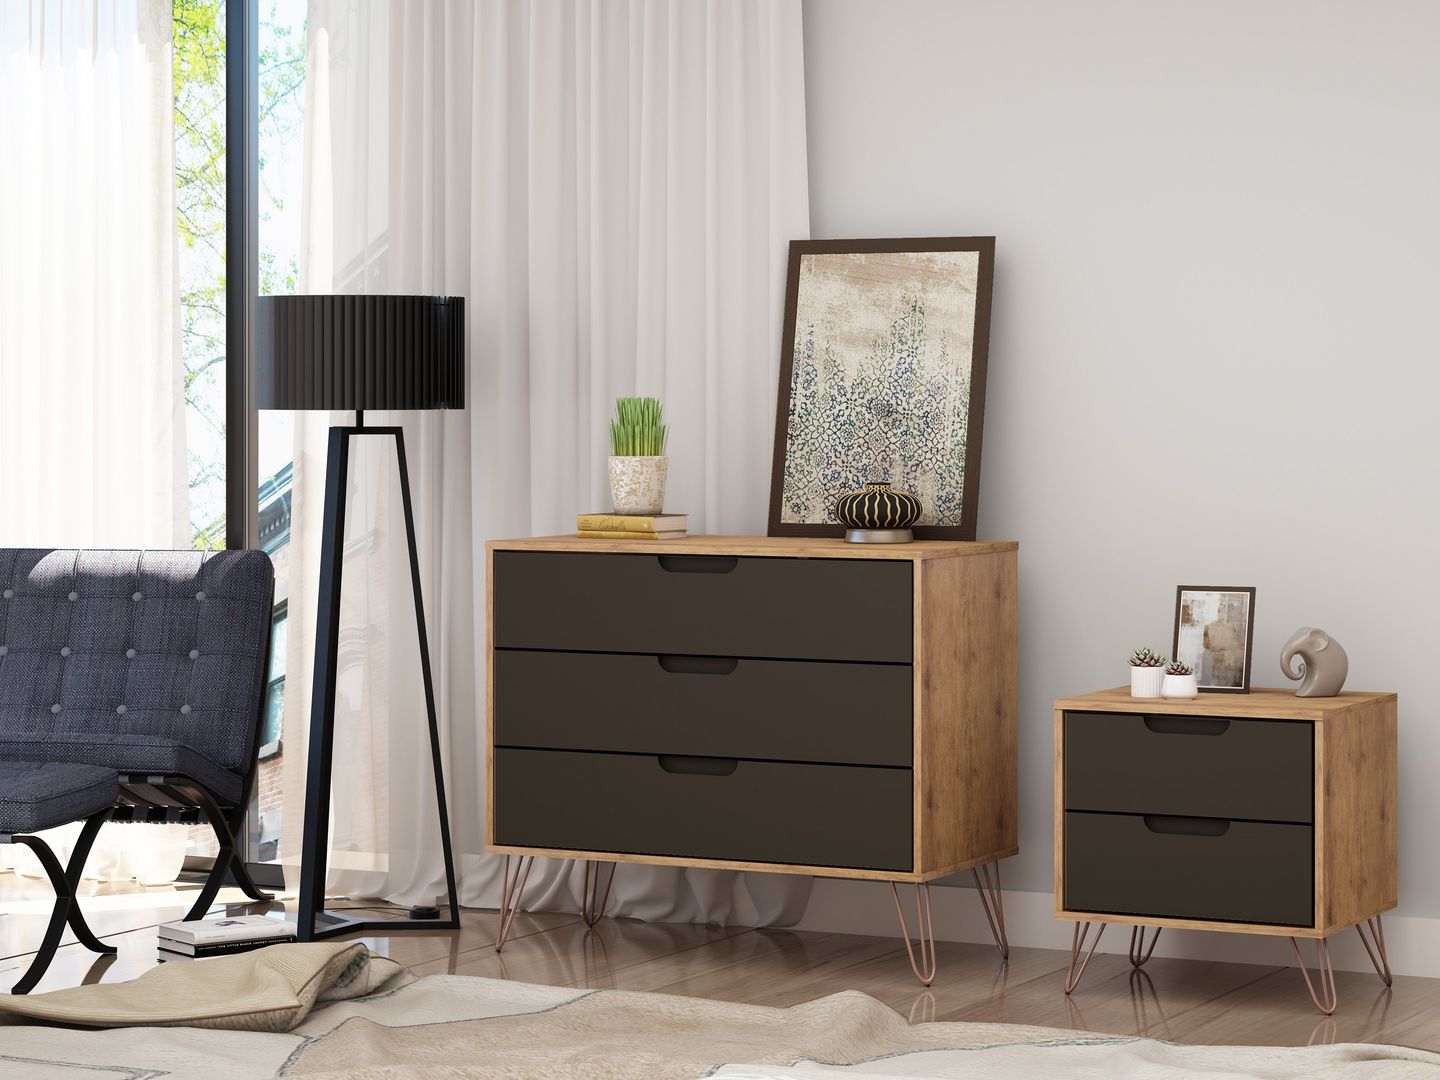 Manhattan Comfort Rockefeller Mic Century- Modern Dresser and Nightstand with Drawers- Set of 2 in Nature and Textured Grey